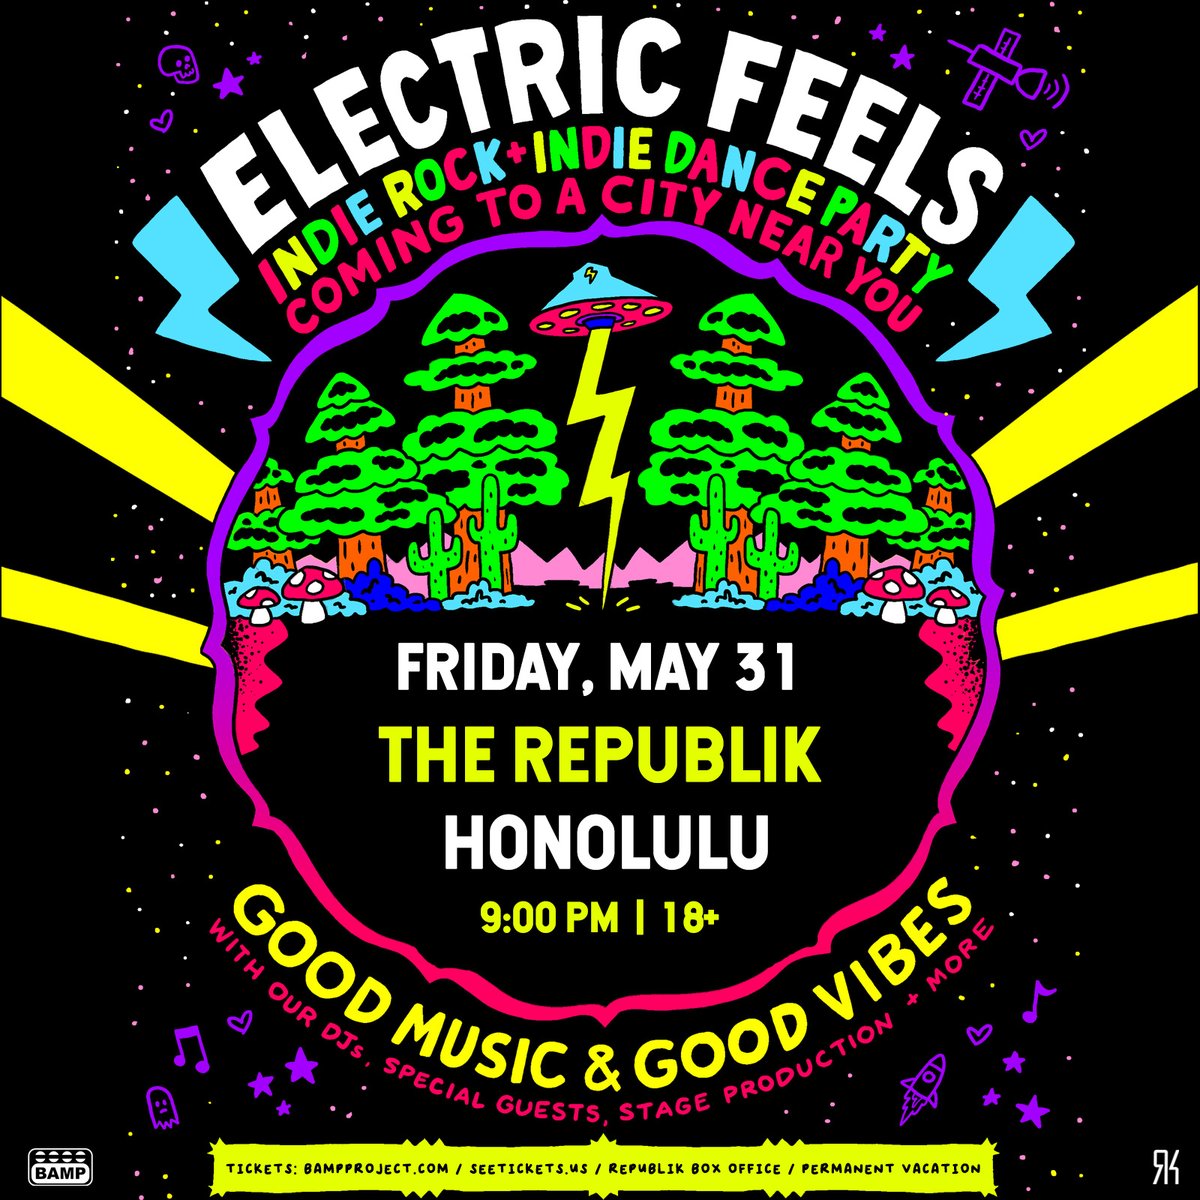 SHOW ANNOUNCEMENT: Kick off your summer plans with us as we bring you another ELECTRIC FEELS Indie Dance Party with @loudvillage on May 31st at the Republik!🕺 Mark your calendars, tickets go on sale this FRIDAY, 4/19 at 12PM through bampproject.com🗓